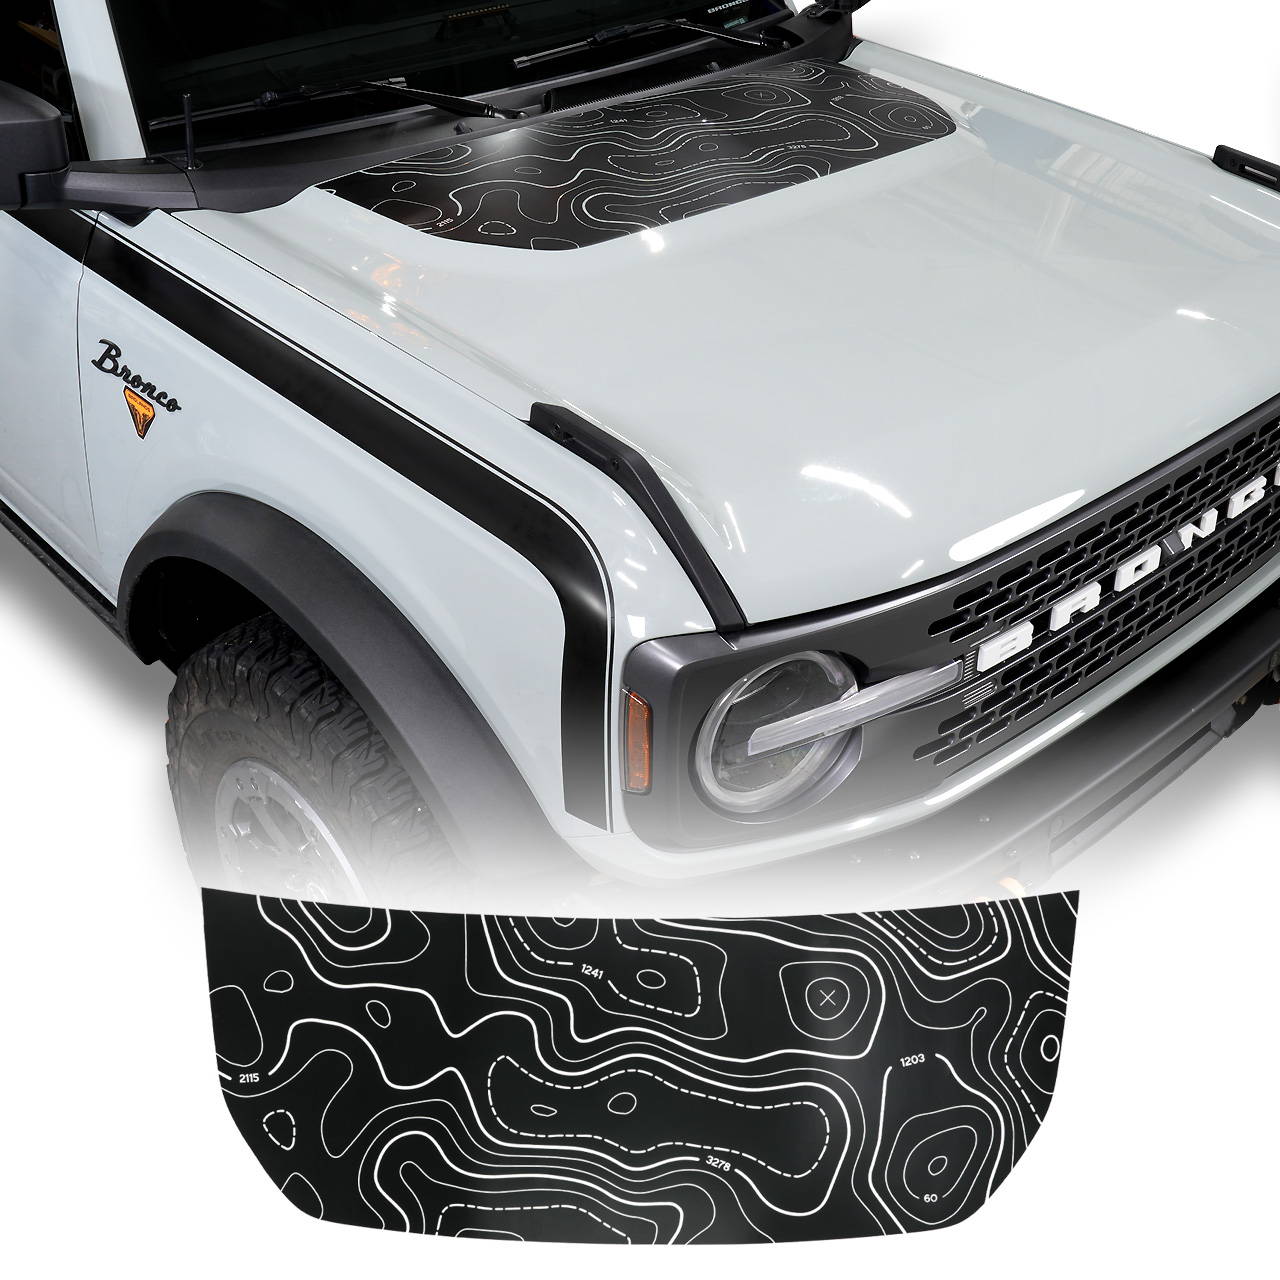 IAG Off-Road Front Hood Graphics - Topography Design fits 2021 + Ford Bronco